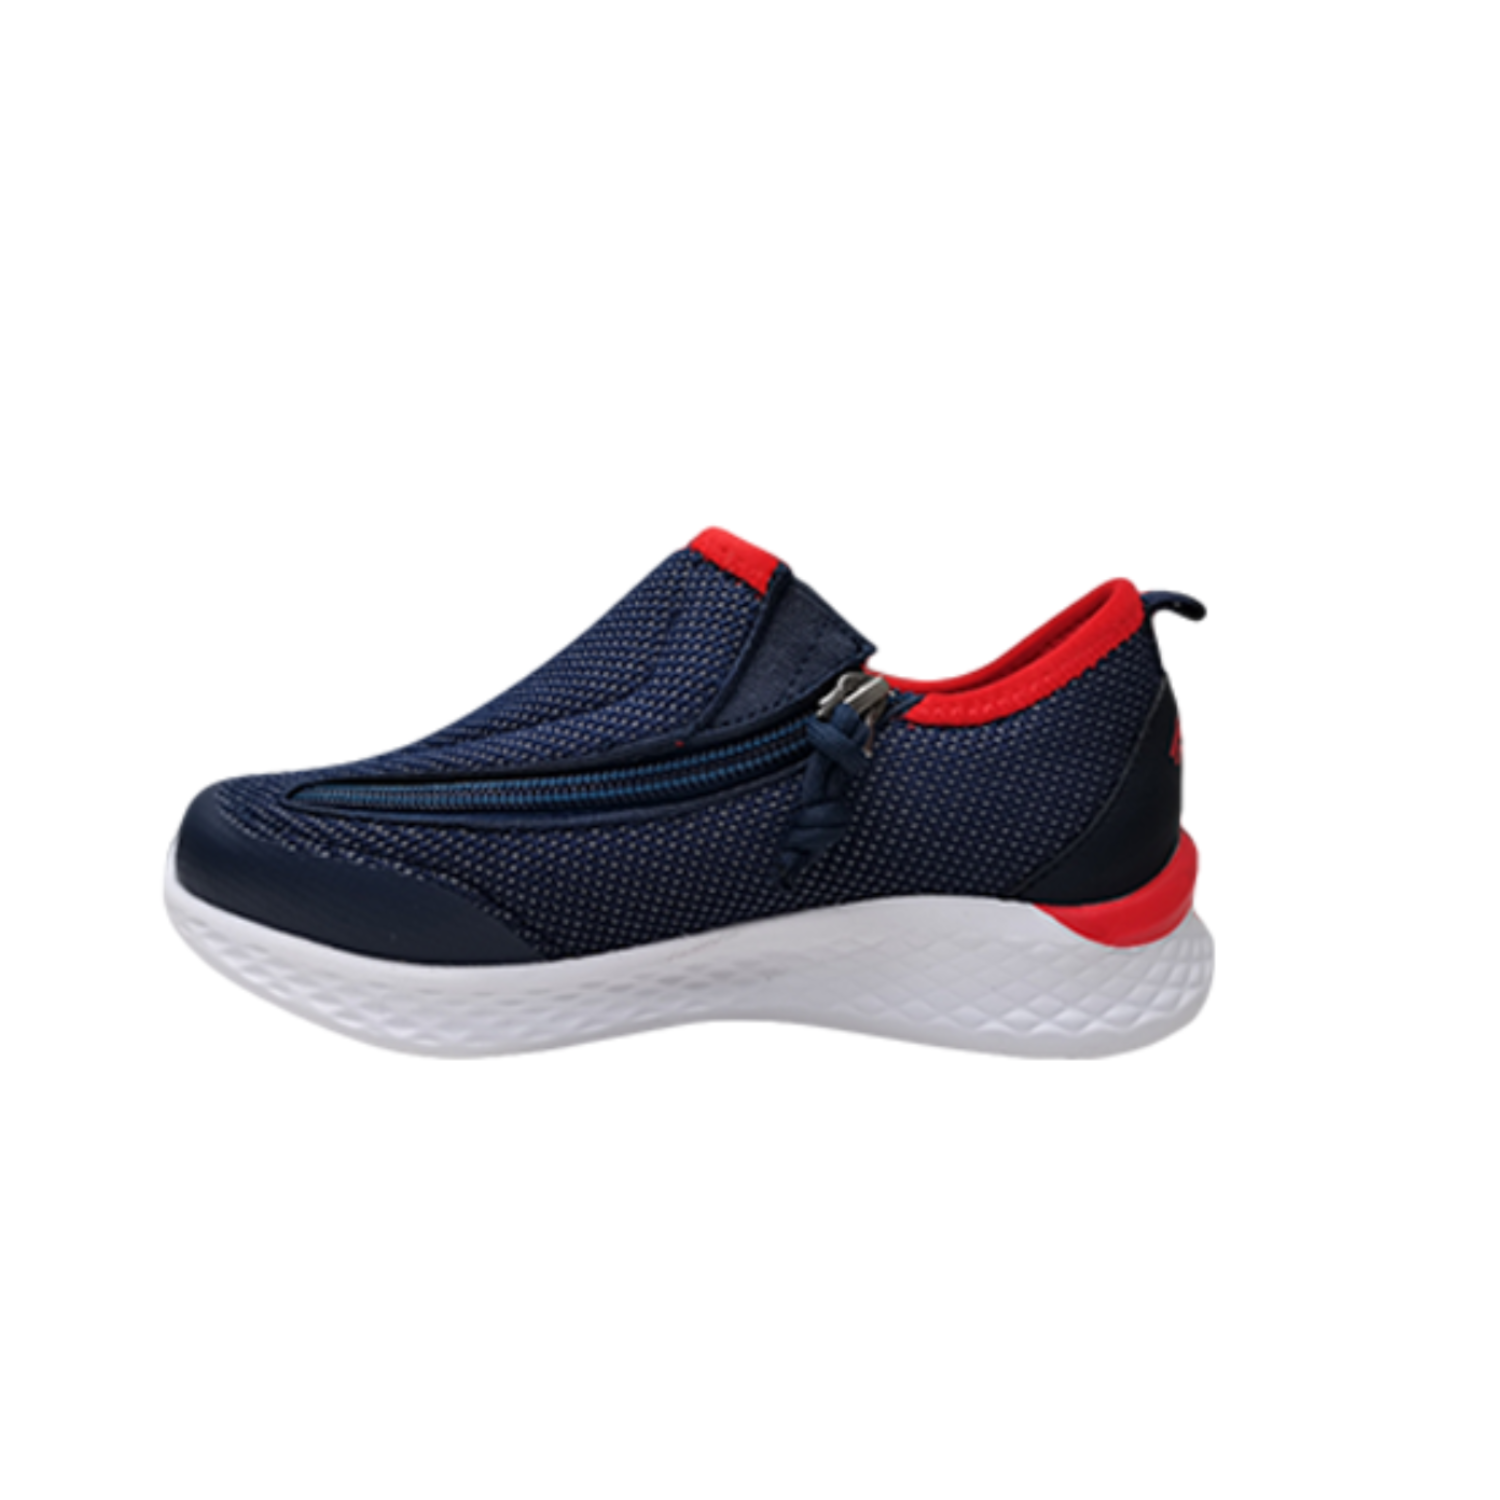 Boys navy red zippered shoes side view